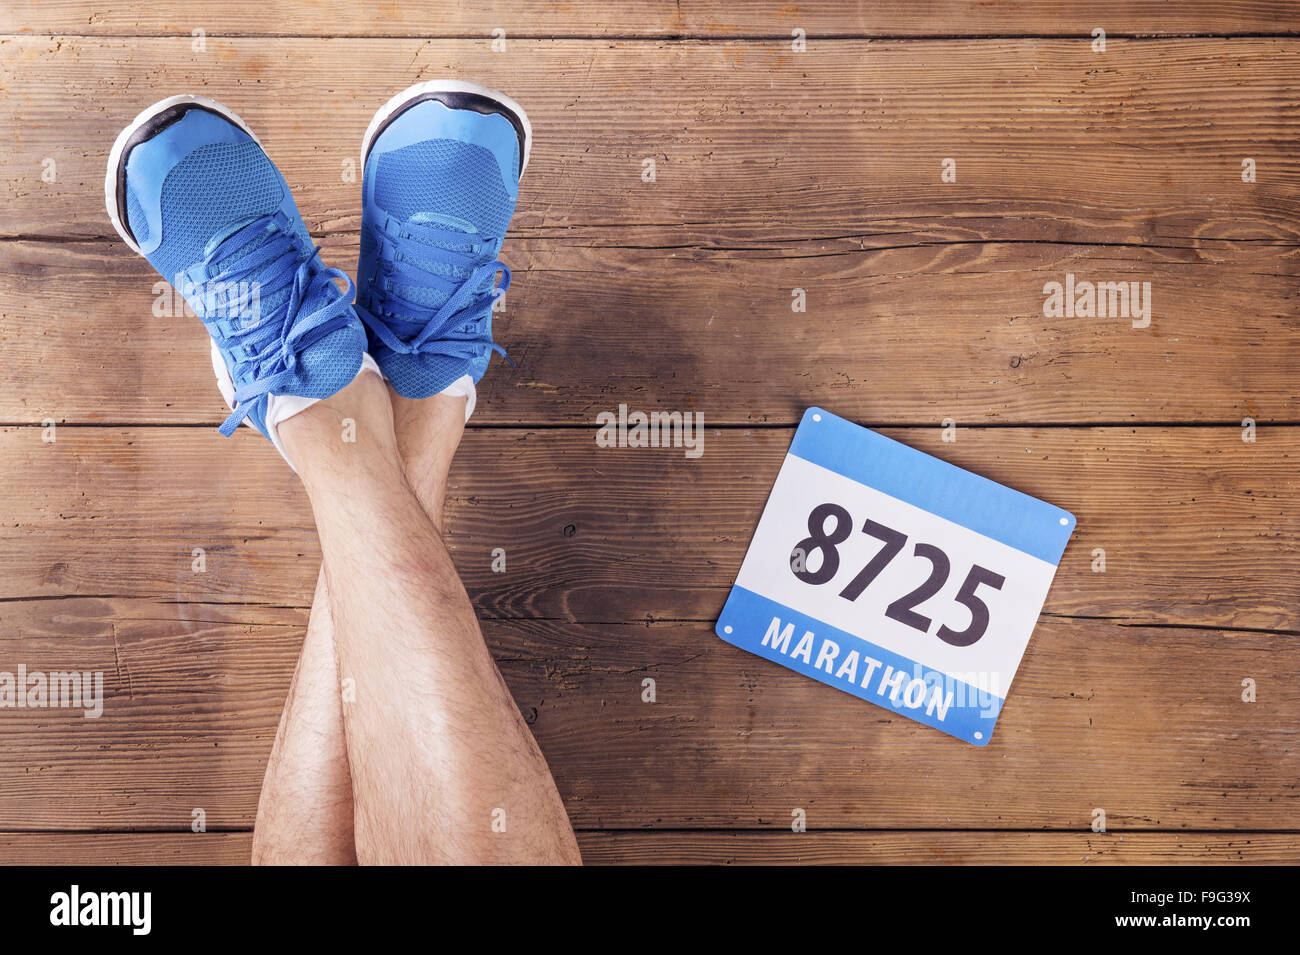 Legs of a runner and race number on a wooden floor background Stock Photo